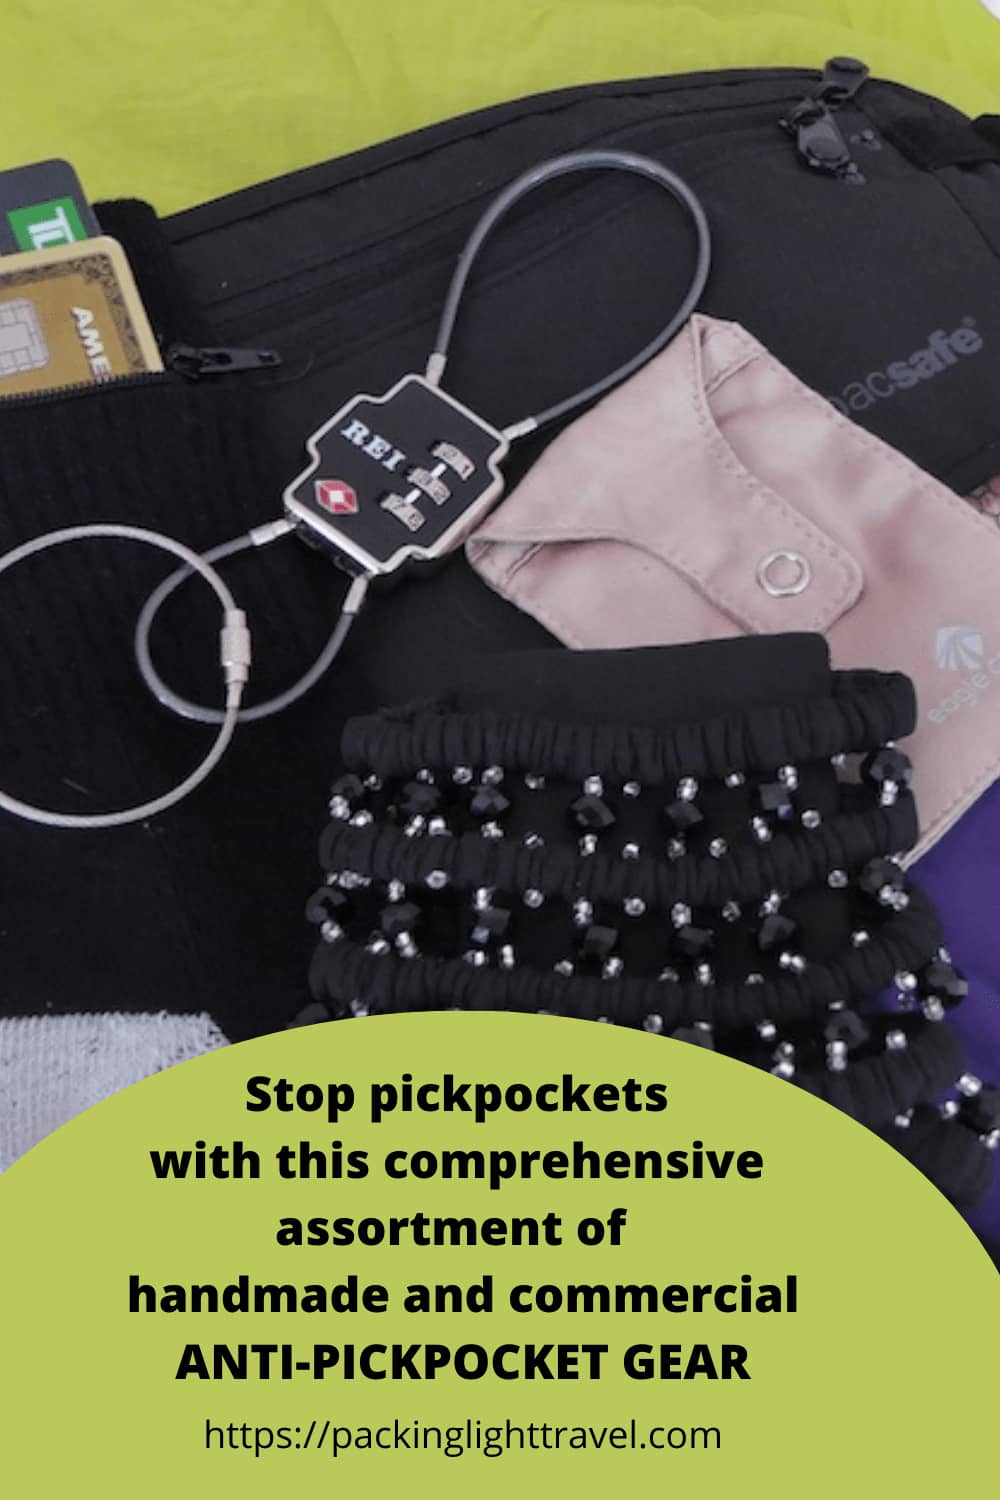 Pickpocket Prevention - Corporate Travel Safety - Safety Tips